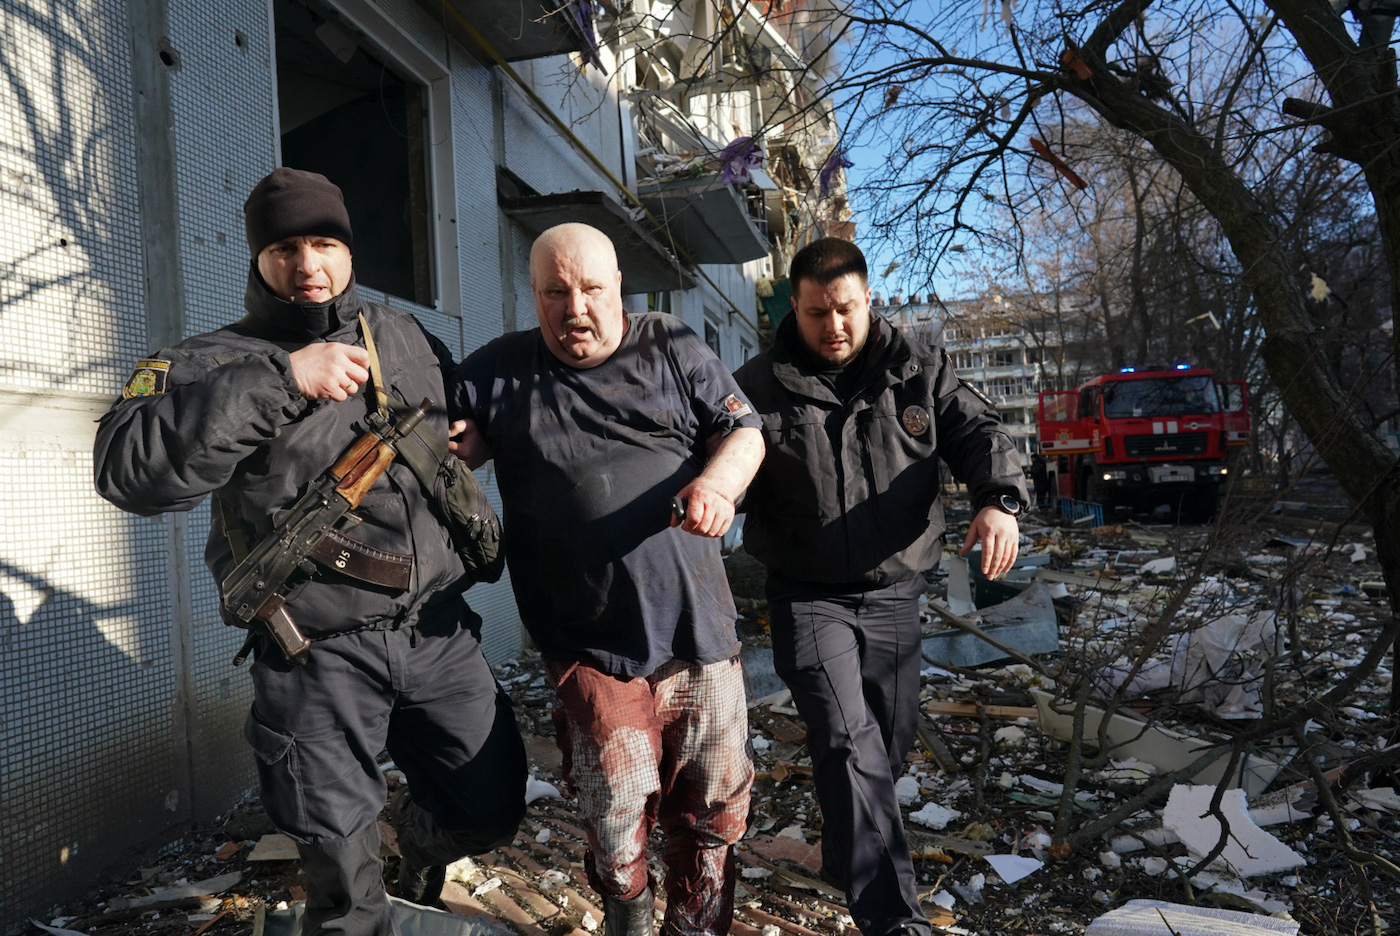 Ukrainian security forces accompany a wounded man after an airstrike hit an apartment complex in Chuhuiv, Kharkiv Oblast, Ukraine on February 24, 2022. Wolfgang Schwan - Anadolu Agency